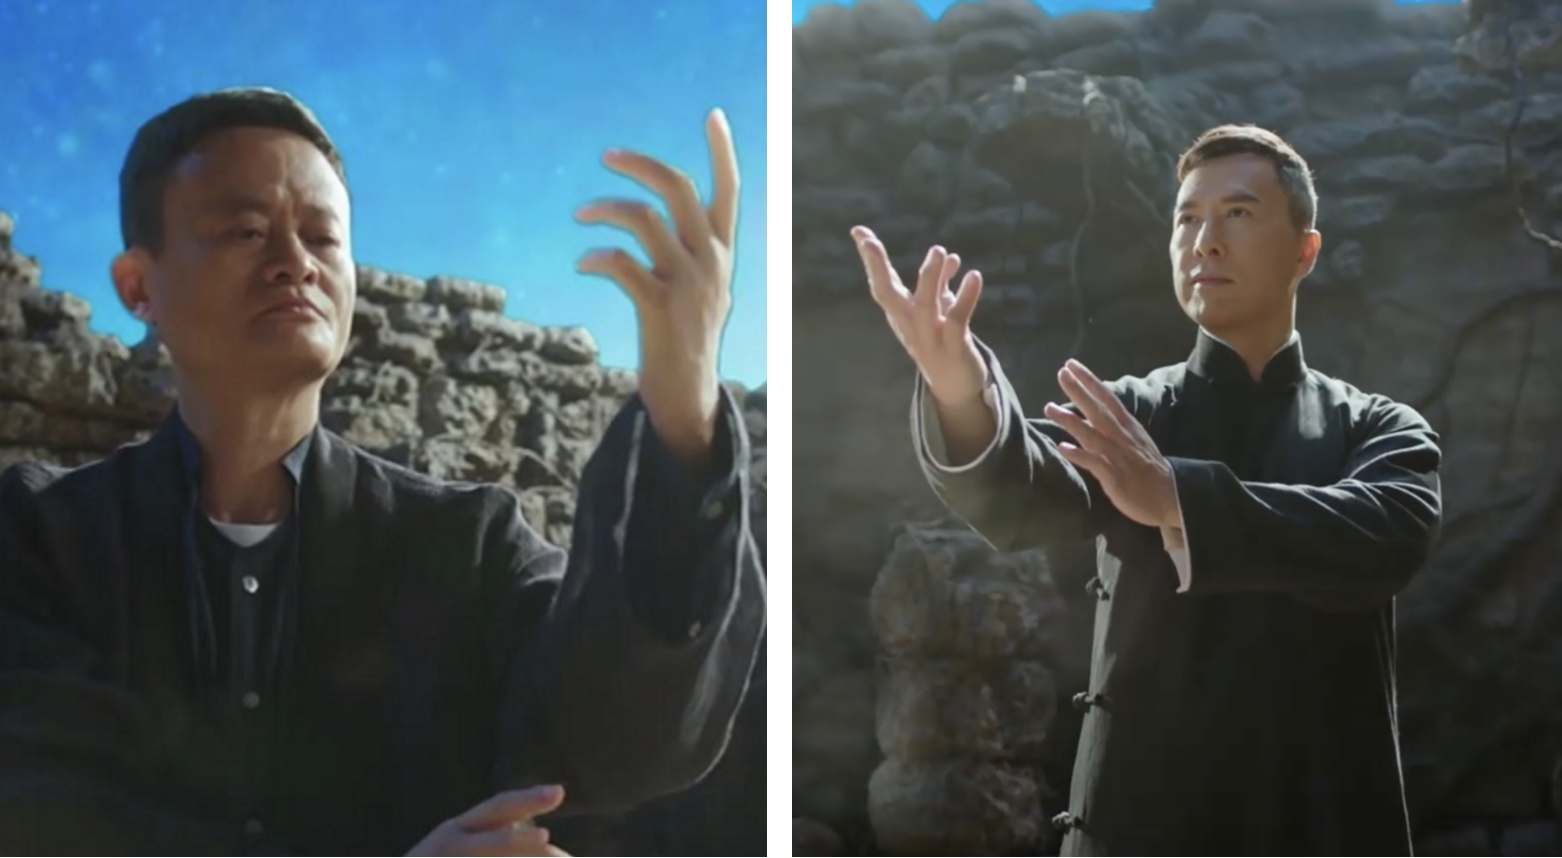 Billionaire Jack Ma Fights Donnie Yen, Jet Li and Others in Epic Short Film ‘GSD’